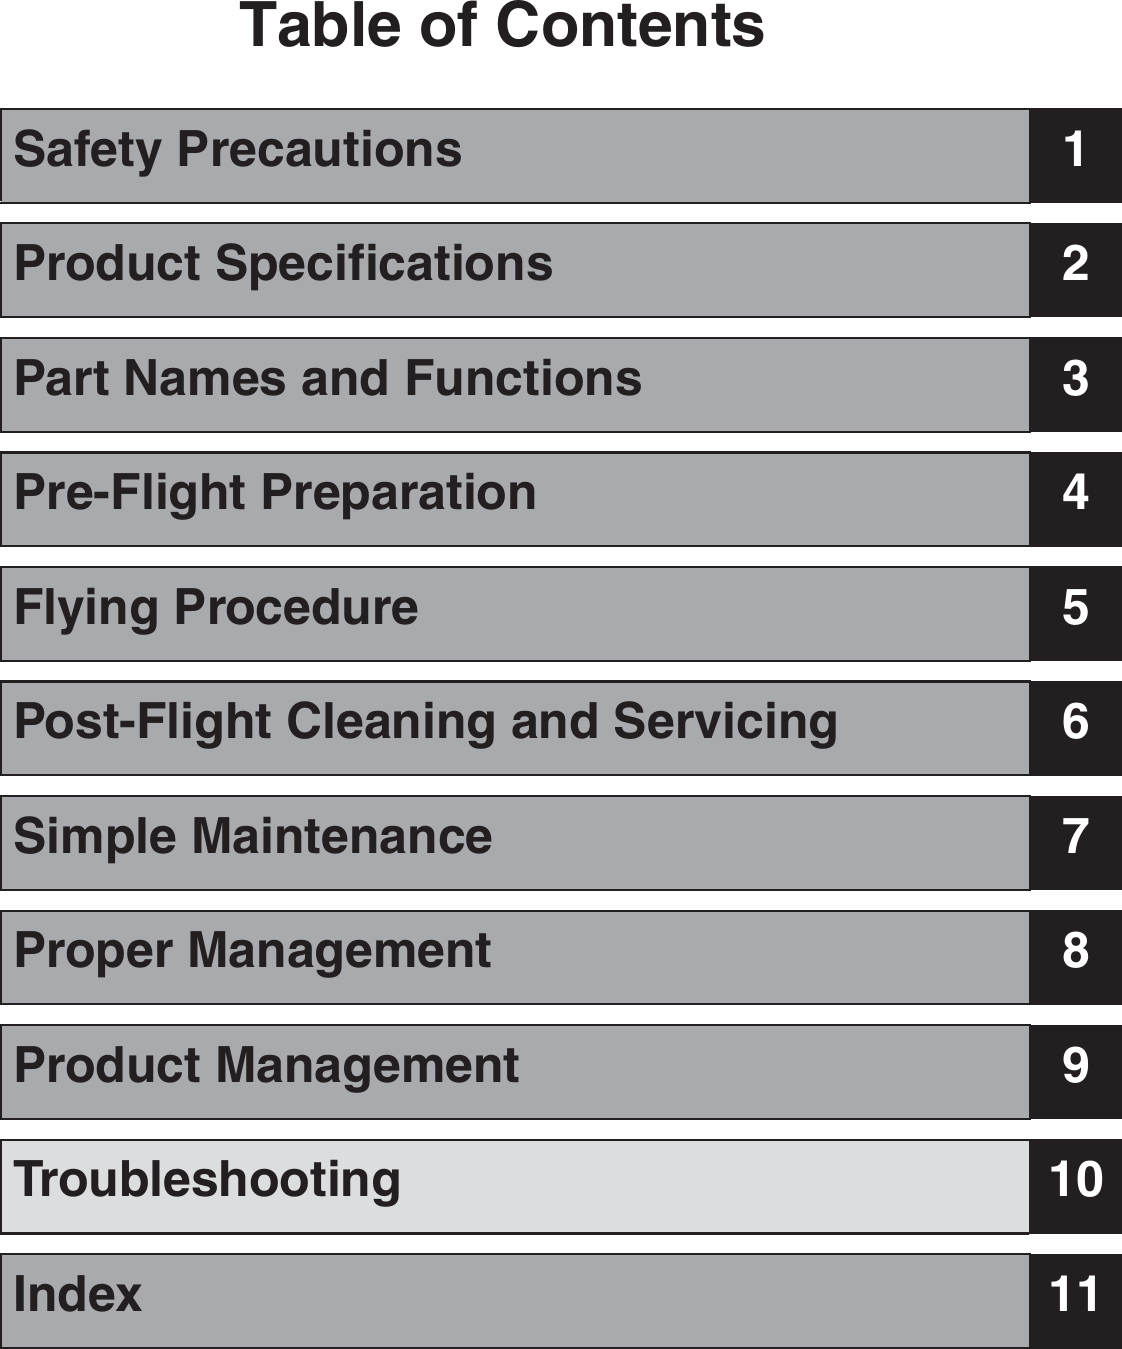 Table of ContentsSafety Precautions 1Product Specifications 2Part Names and Functions 3Pre-Flight Preparation 4Flying Procedure 5Post-Flight Cleaning and Servicing 6Simple Maintenance 7Proper Management 8Product Management 9Troubleshooting 10Index 11